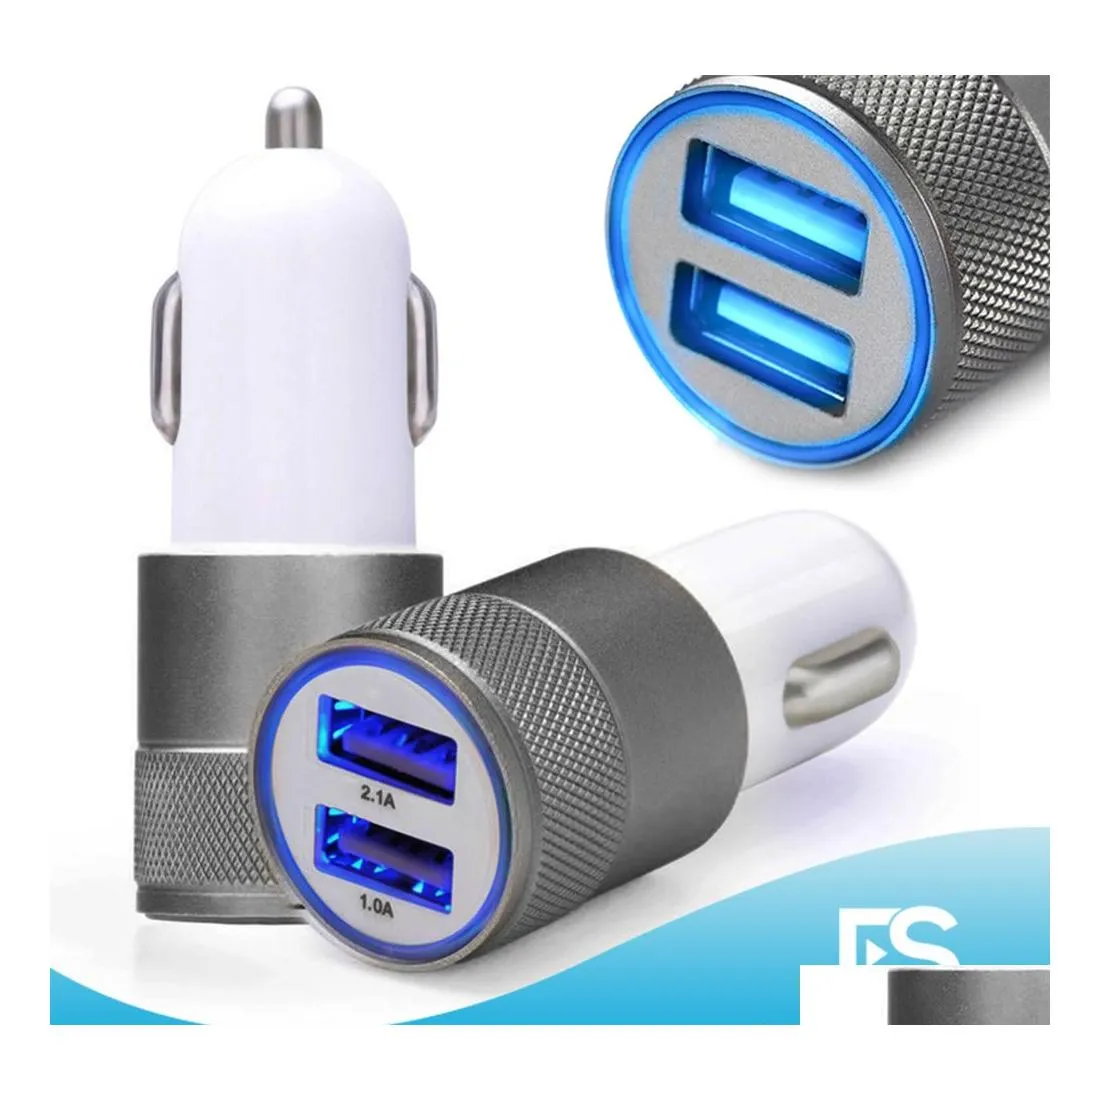 Cell Phone Chargers Metal 2 Ports Car Charger 2.1A Add1A Power Adapter Colorf Micro Usb Plug For 12 13 Gps Mp3 S8 S9 Android With Op Dh02P